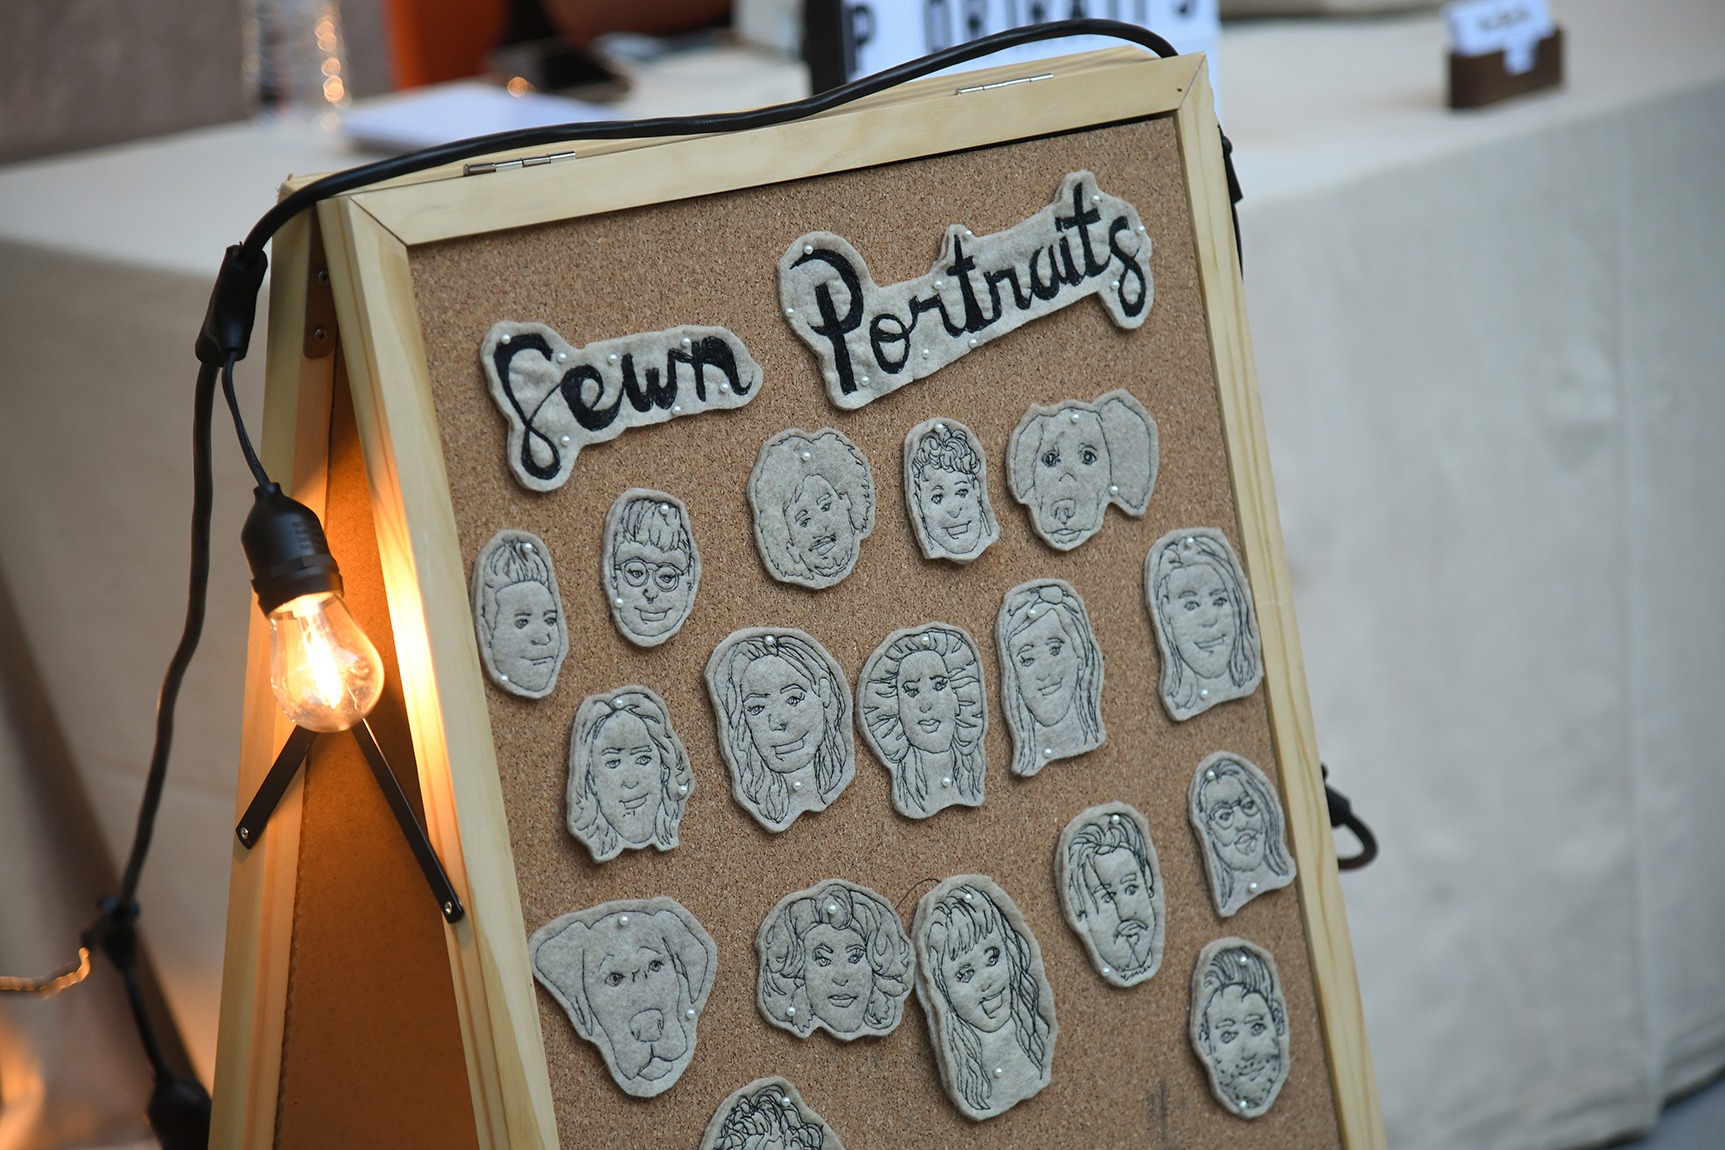 Several sewn portraits by artist Tucker Pierce pinned to a cork board